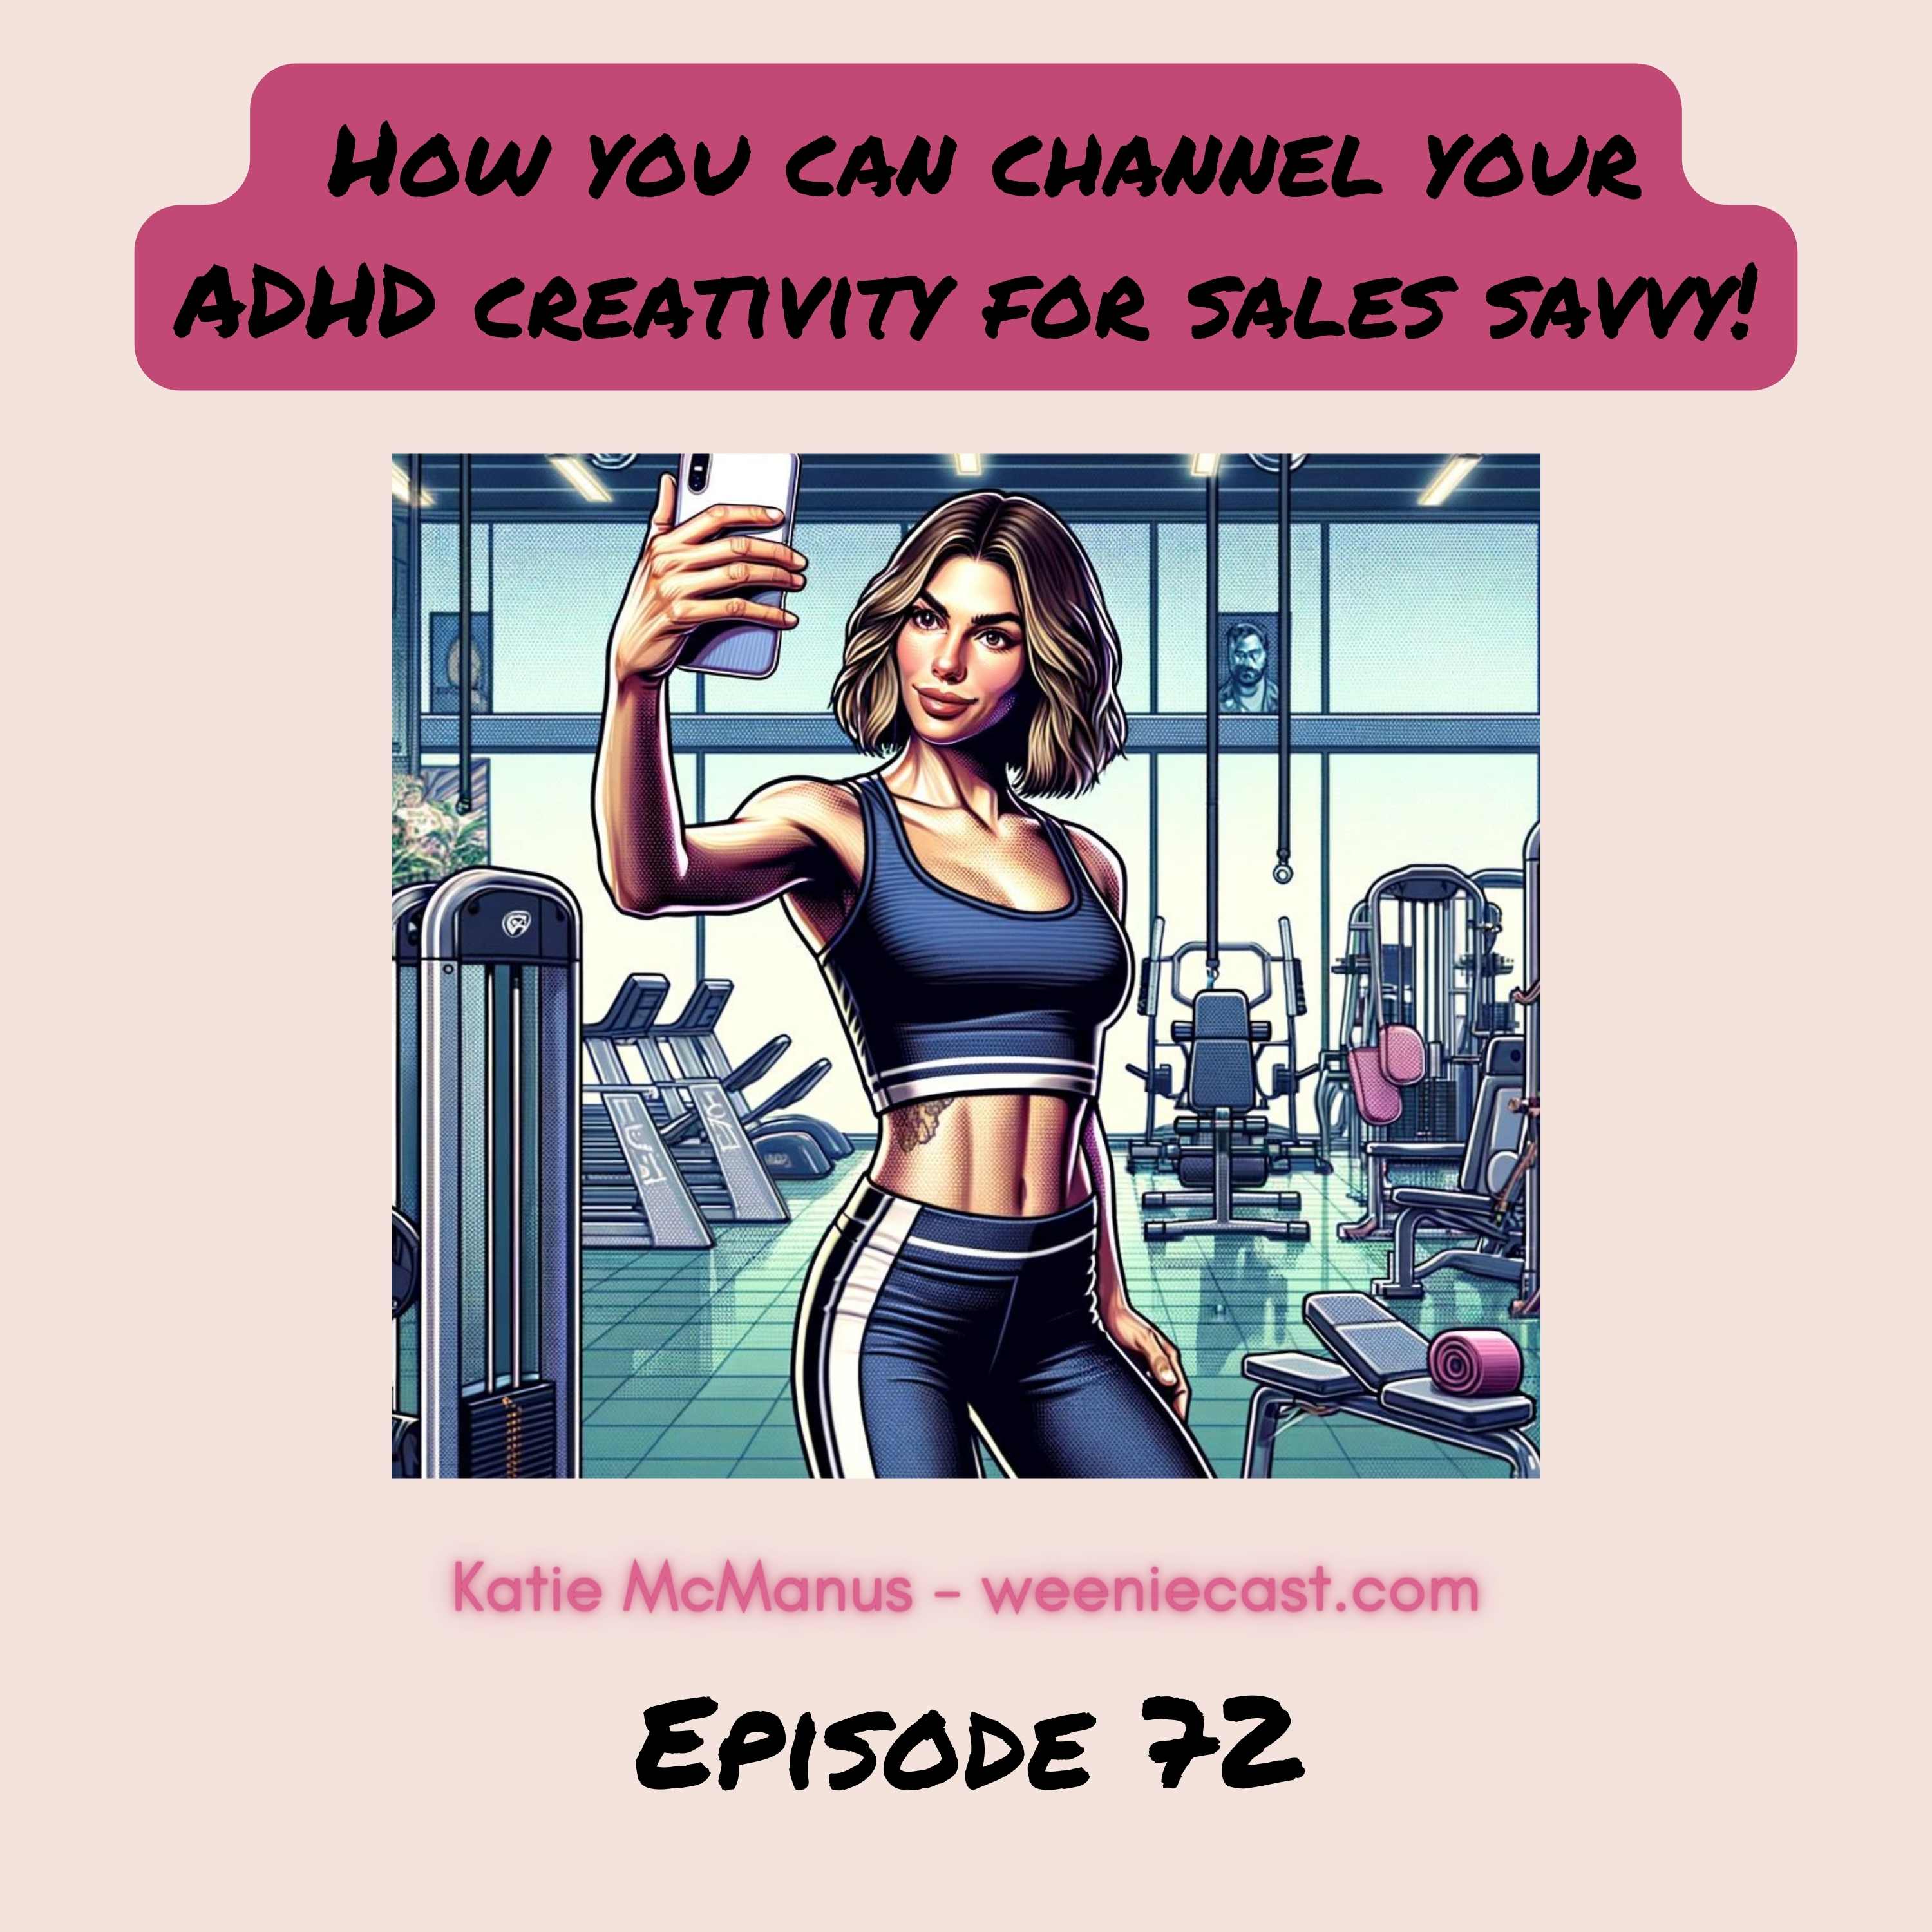 Want better sales? Channel your ADHD creativity!